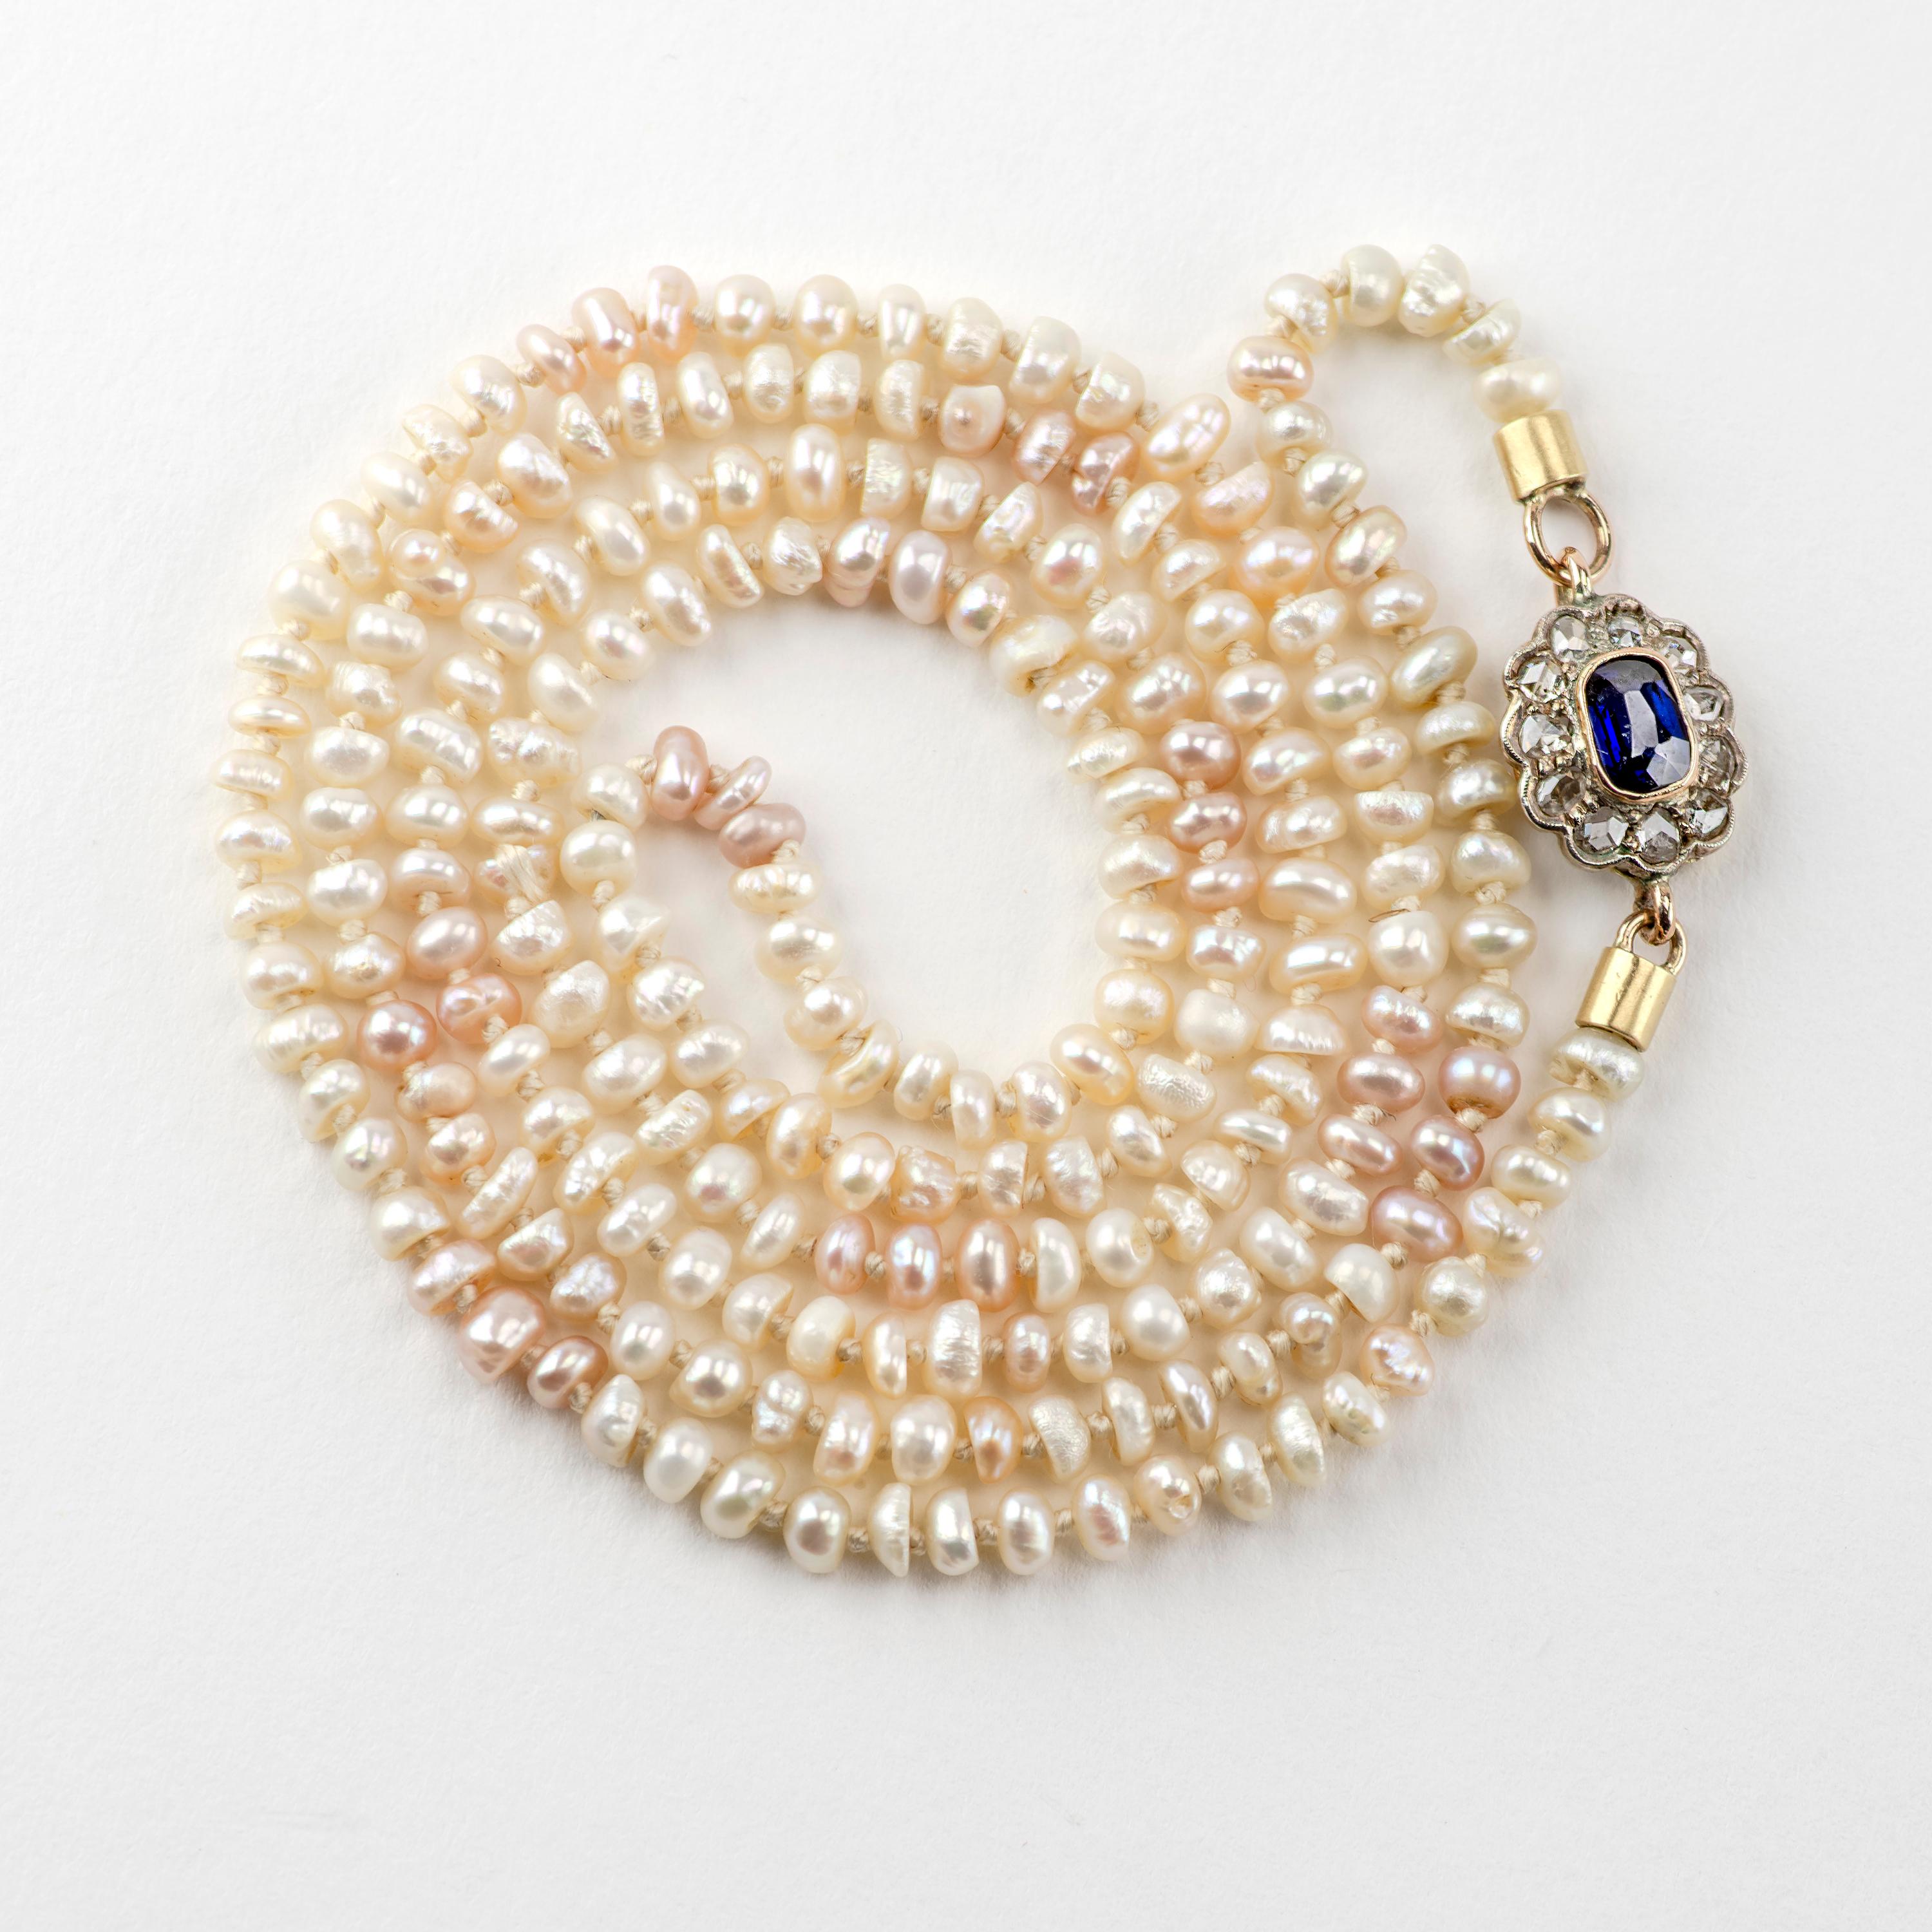 Early Victorian Basra Sea Pearl Necklace with Sapphire and Diamond Clasp